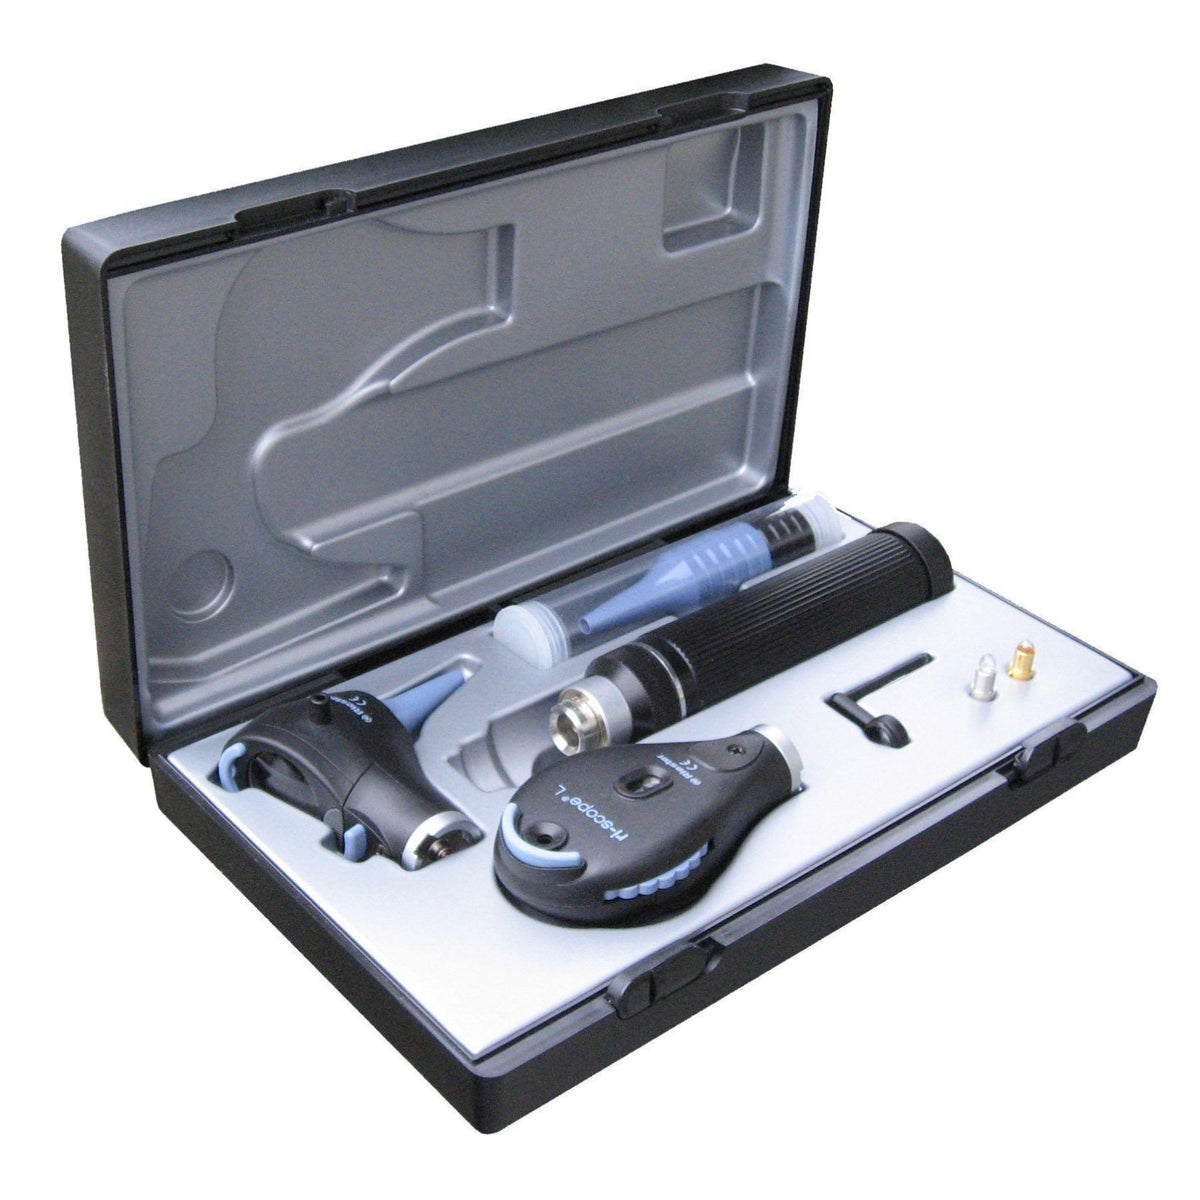 Riester Ri-Scope L Otoscope / Ophthalmoscope L1 HL 2.5 V C Handle for 2 Alkaline-Batteries or Ri-Accu